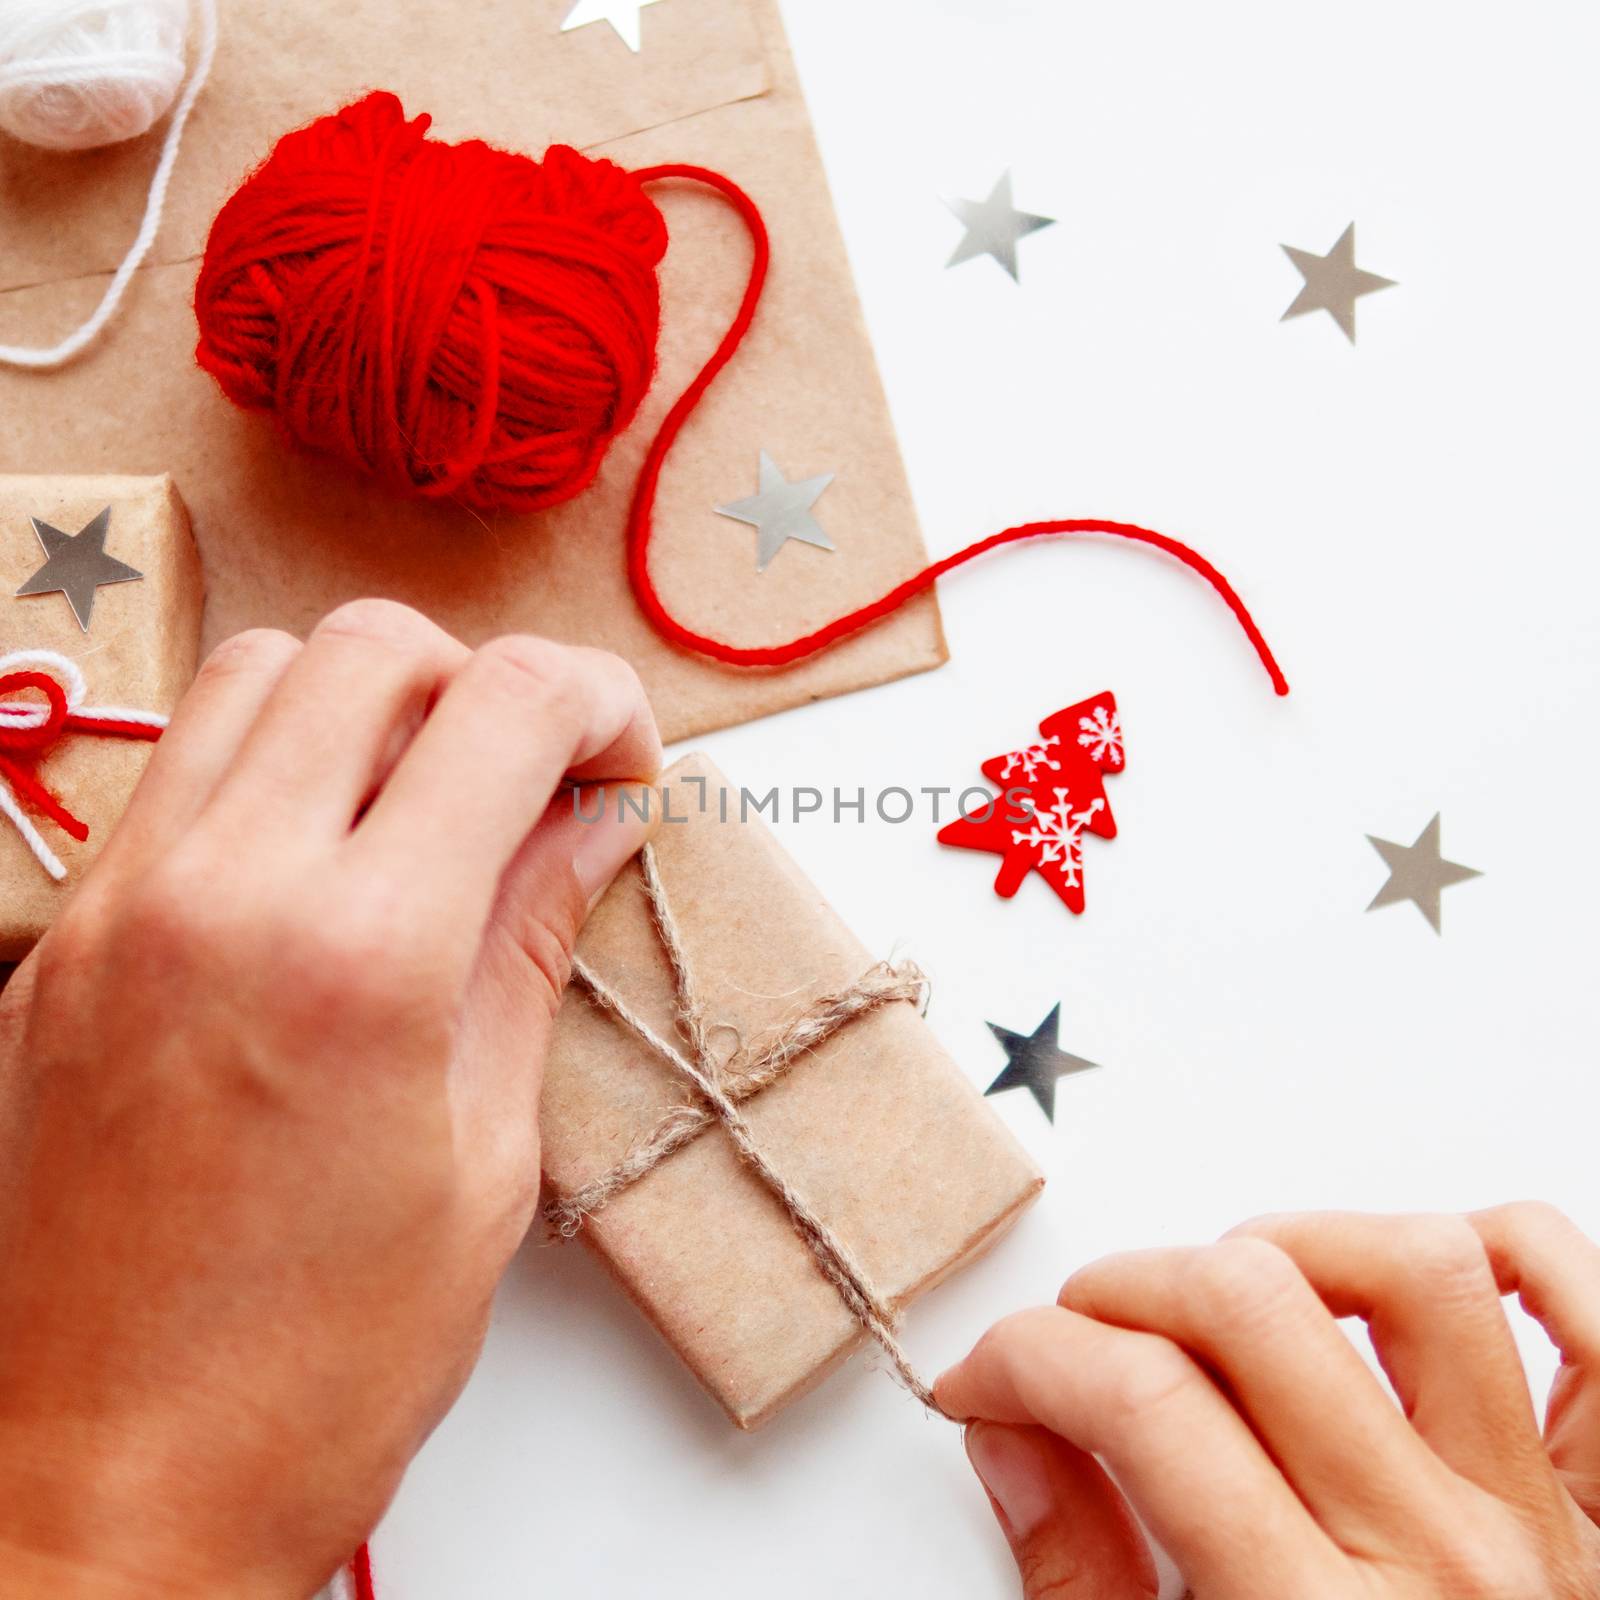 Woman is packing Christmas and New Year DIY presents in craft paper. Gifts tied with white and red threads. Boxes and star confetti on white background.